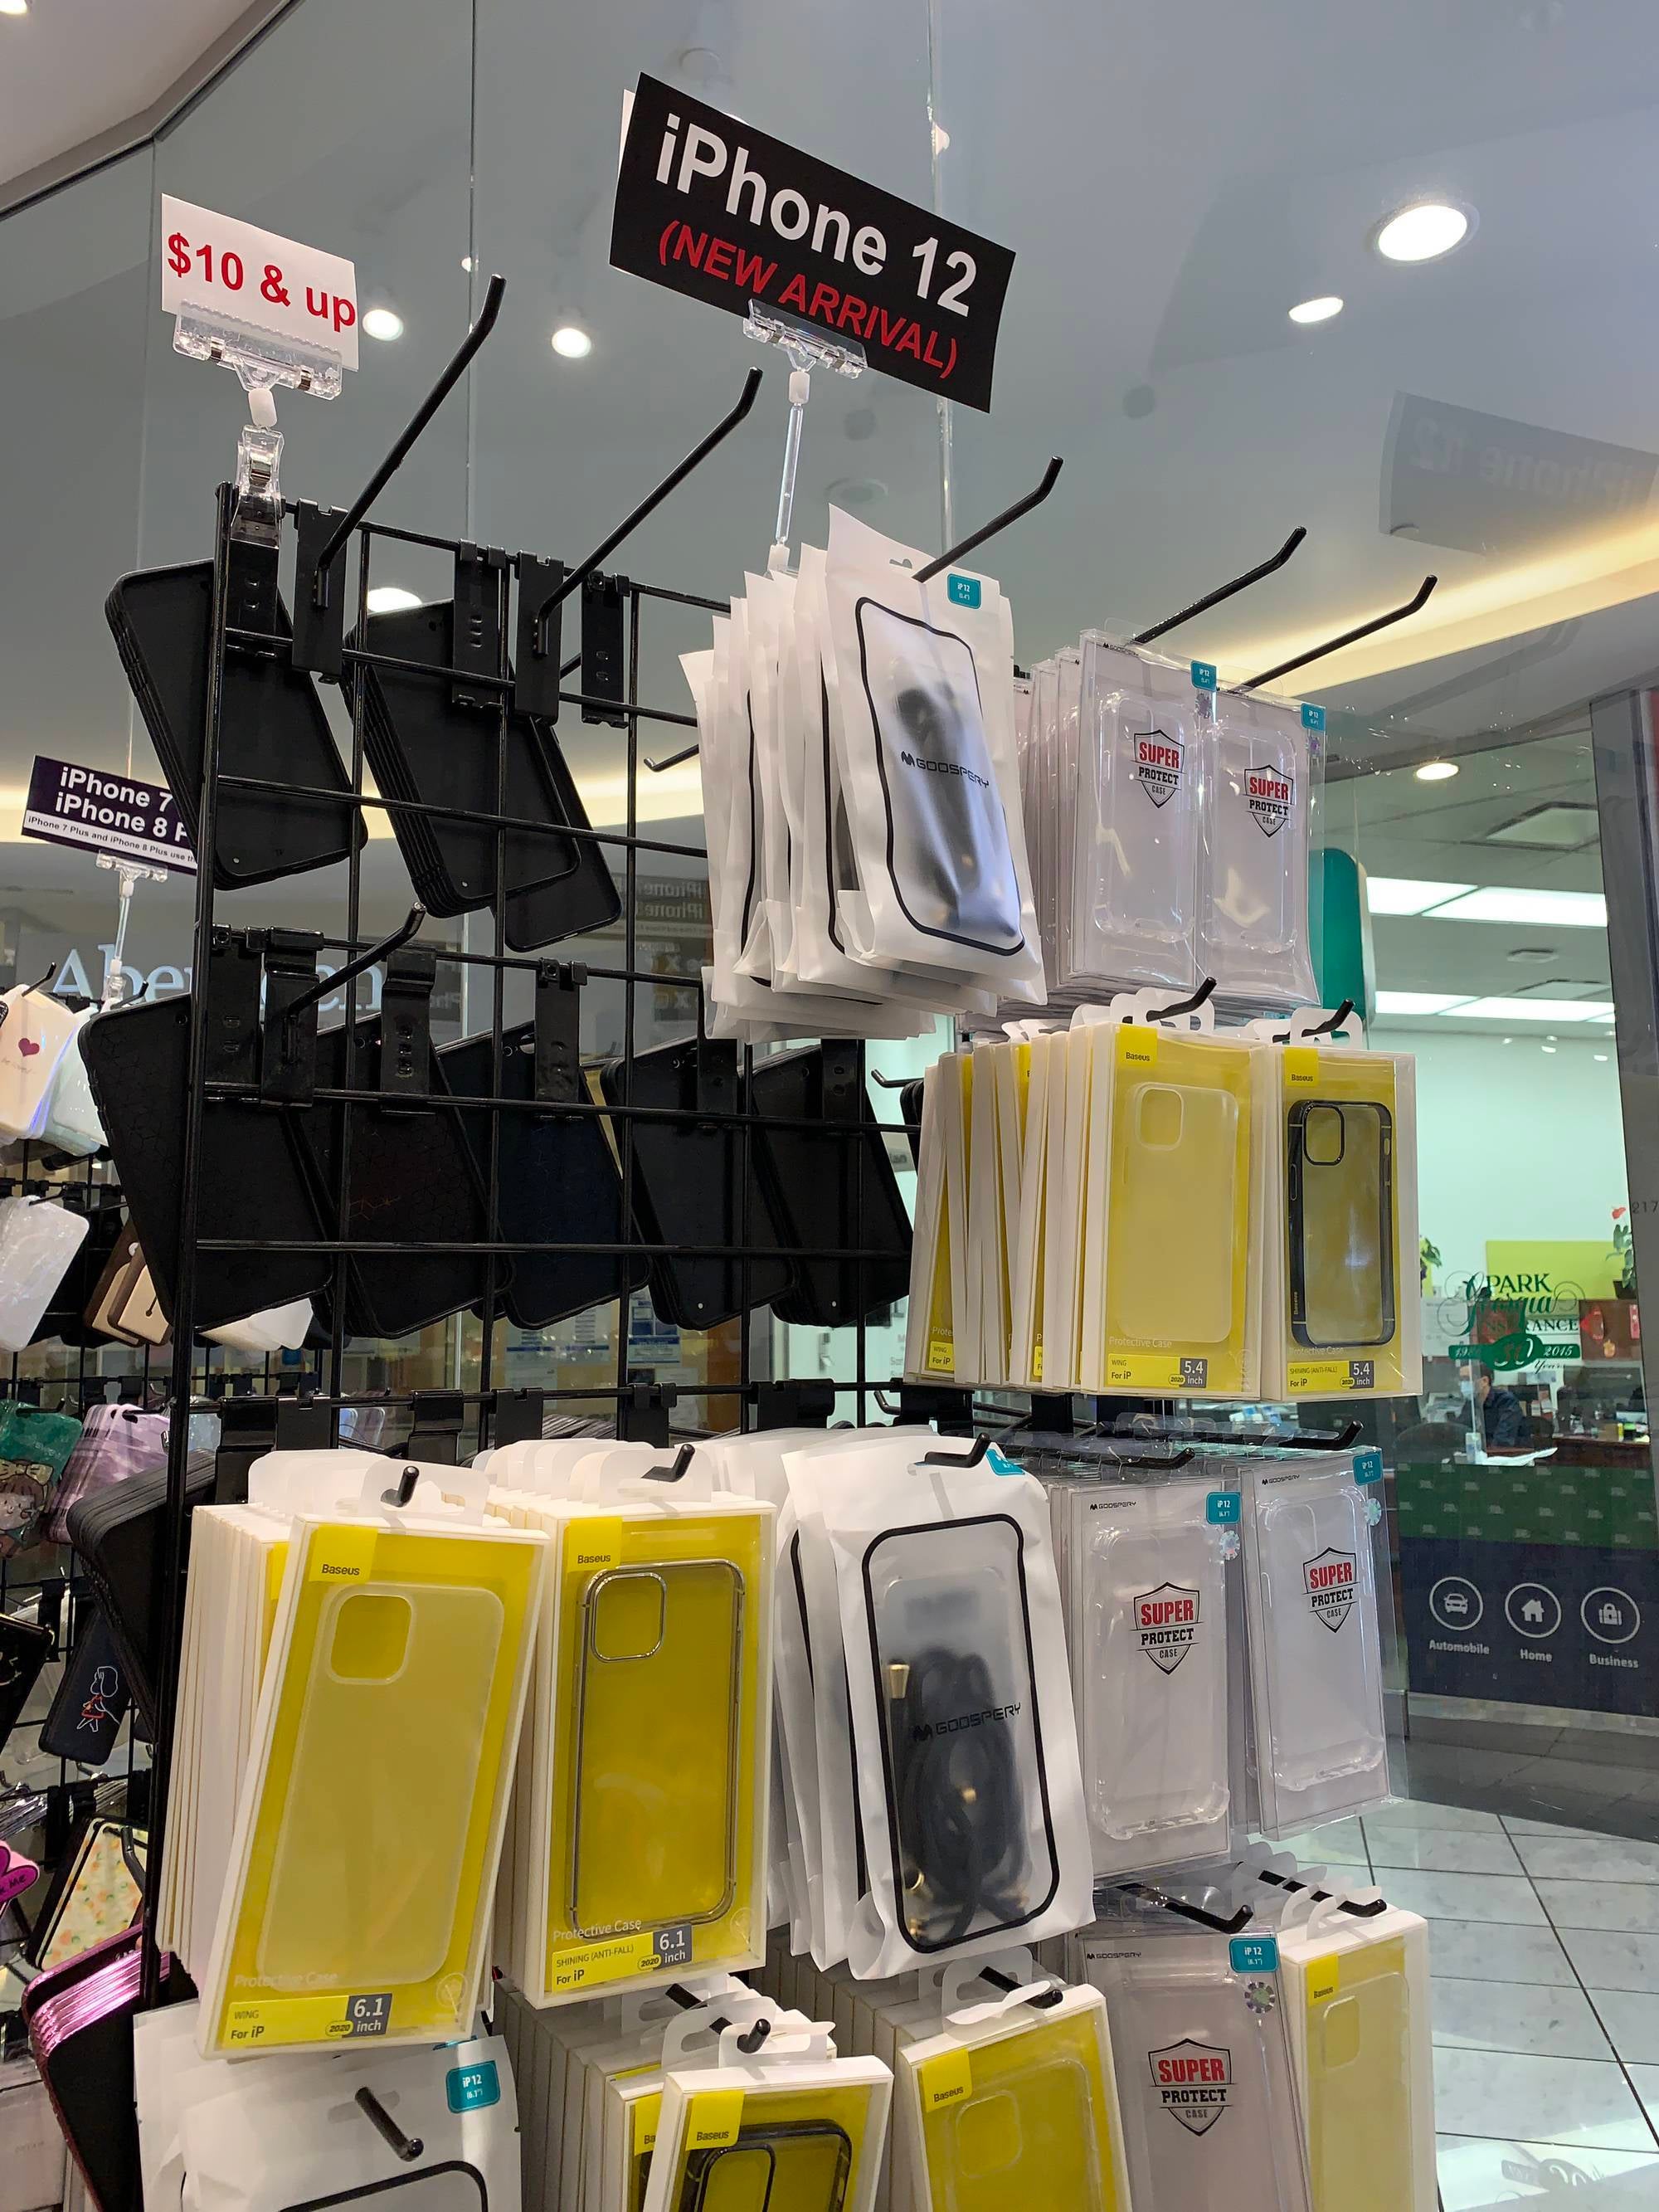 iPhone 12 cases spotted at a store in Canada - Leaked Target ad and Apple's YouTube channel might hold clues to iPhone 12 launch plans